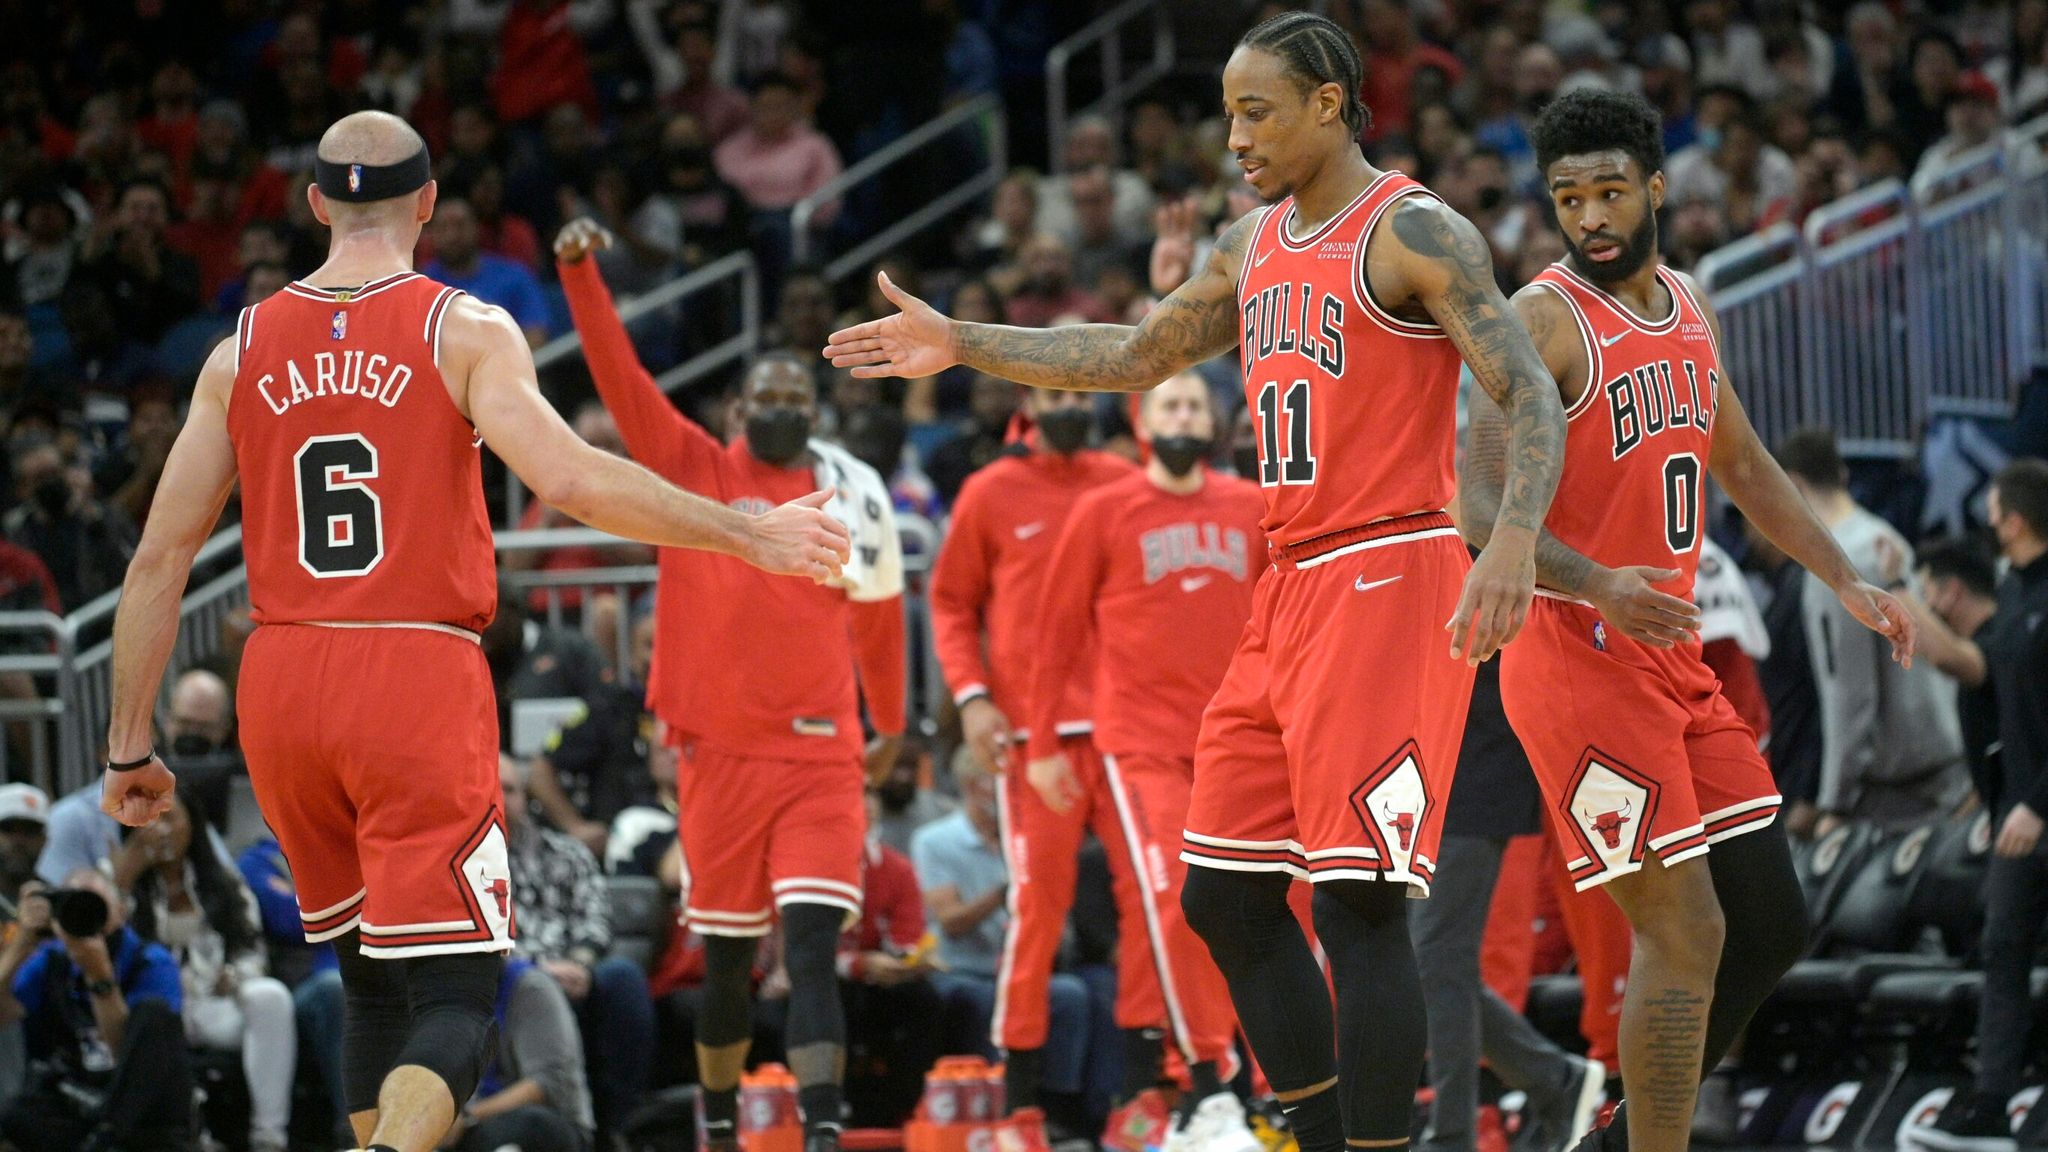 16 Facts About Chicago Bulls 